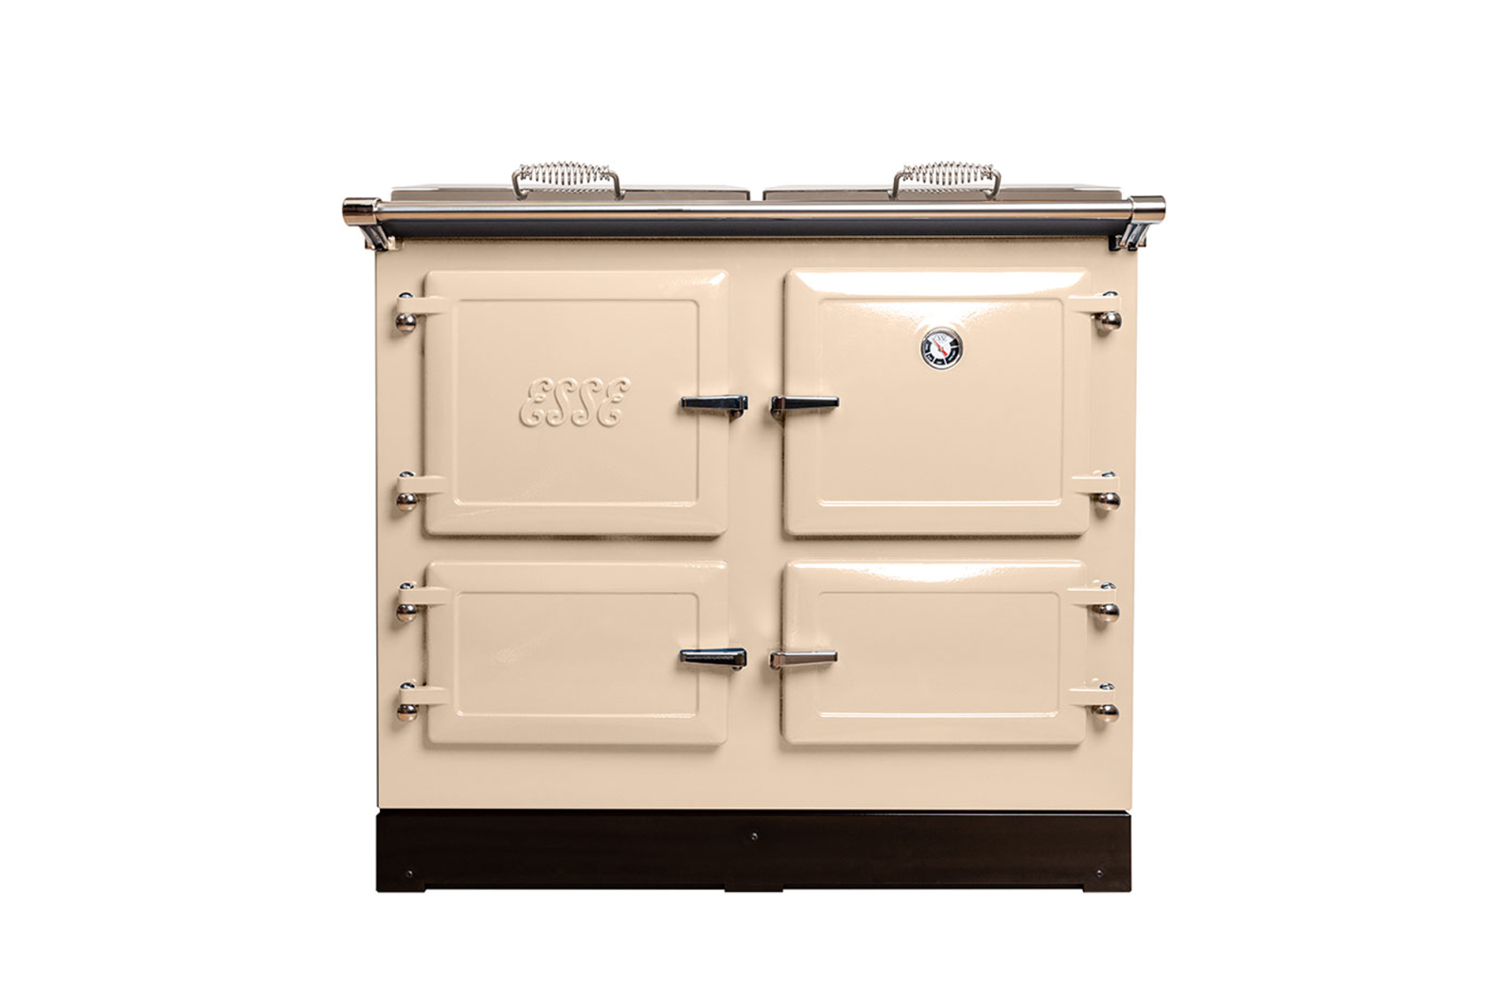 the esse \1000x electric range cooker in cream is available through esse retail 12